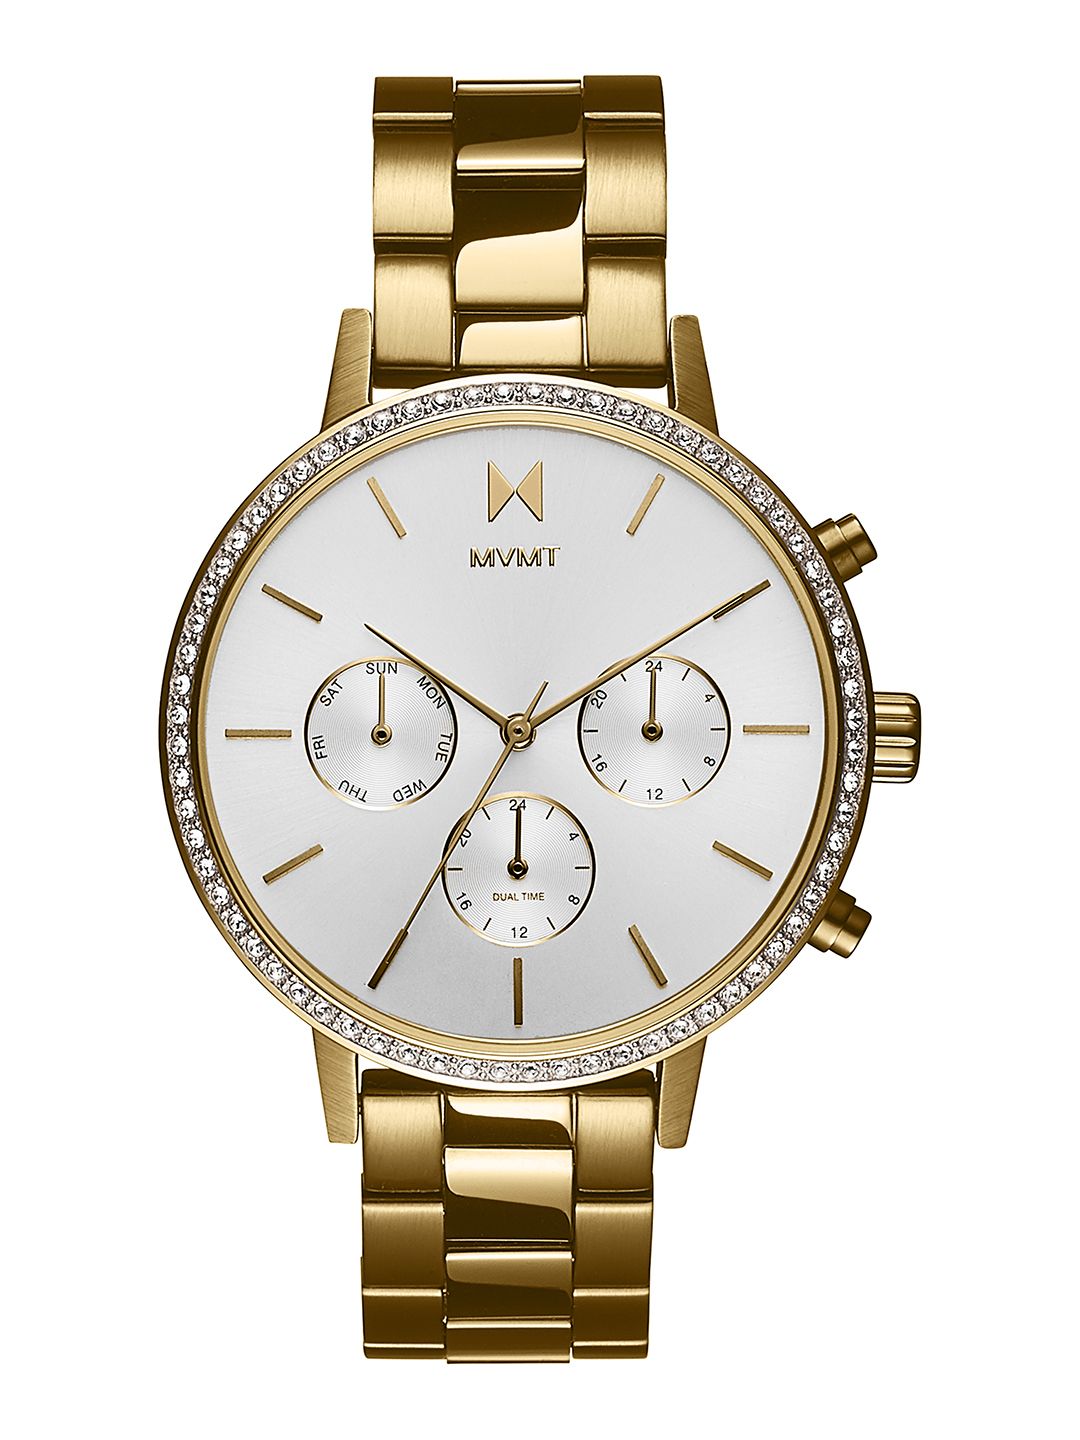 MVMT Women White Dial & Gold Toned Bracelet Style Strap Analogue Watch 28000134 Price in India